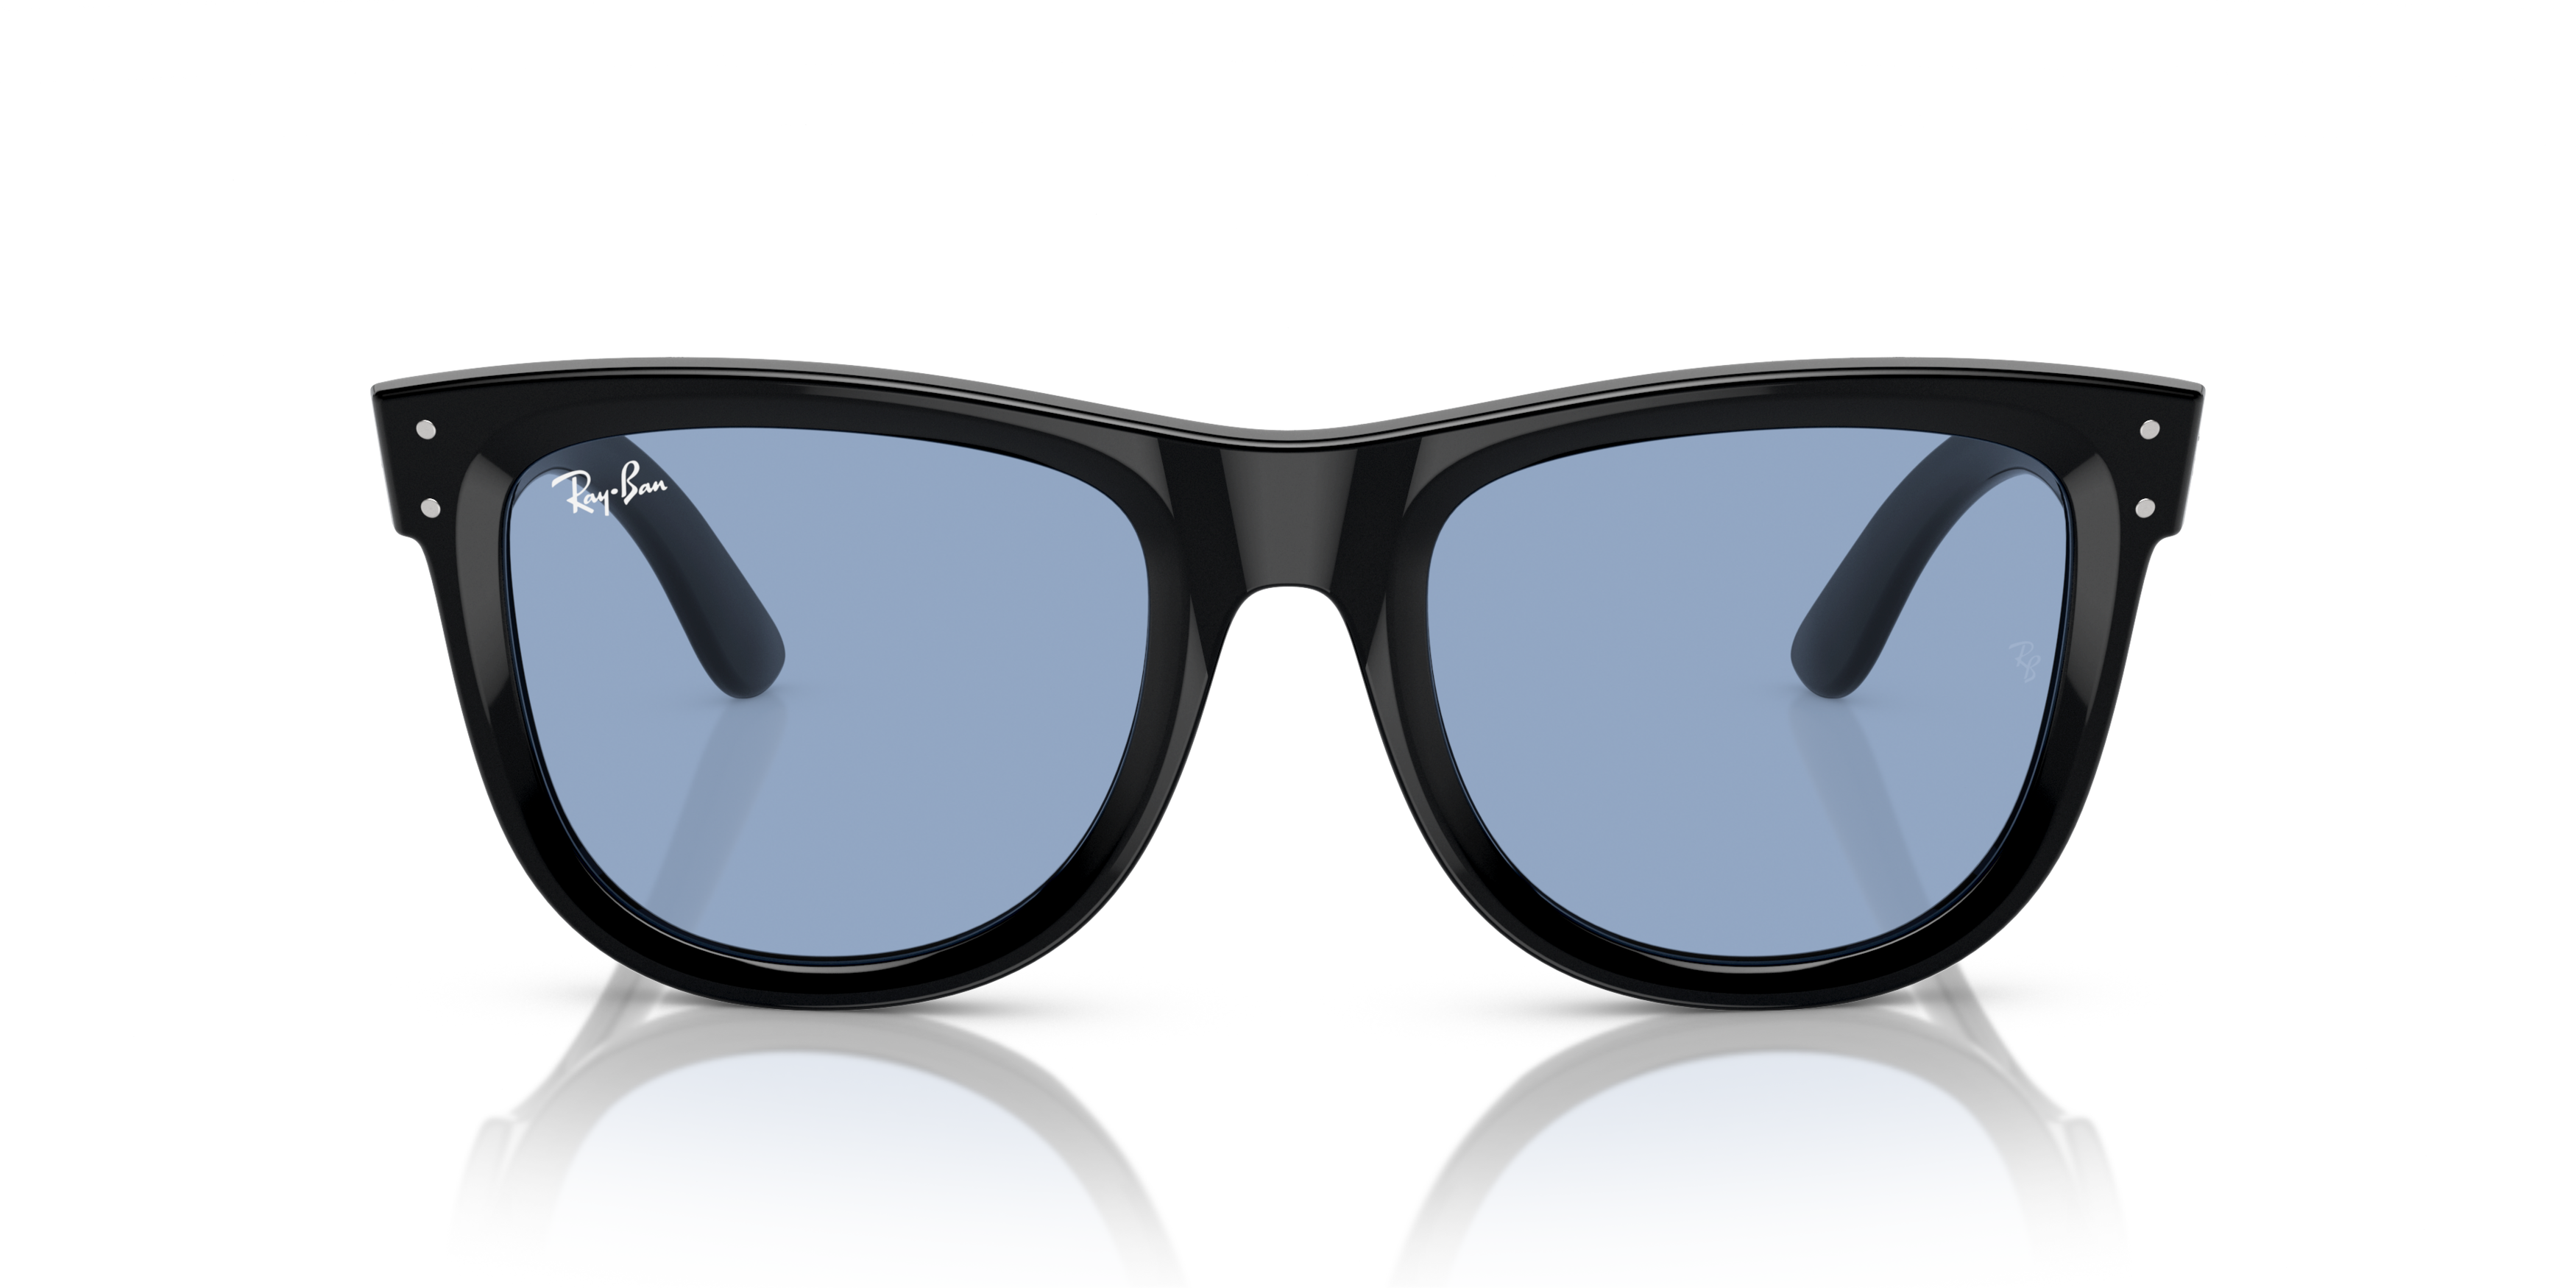 [products.image.front] Ray-Ban Wayfarer Reverse RBR 0502S Sunglasses